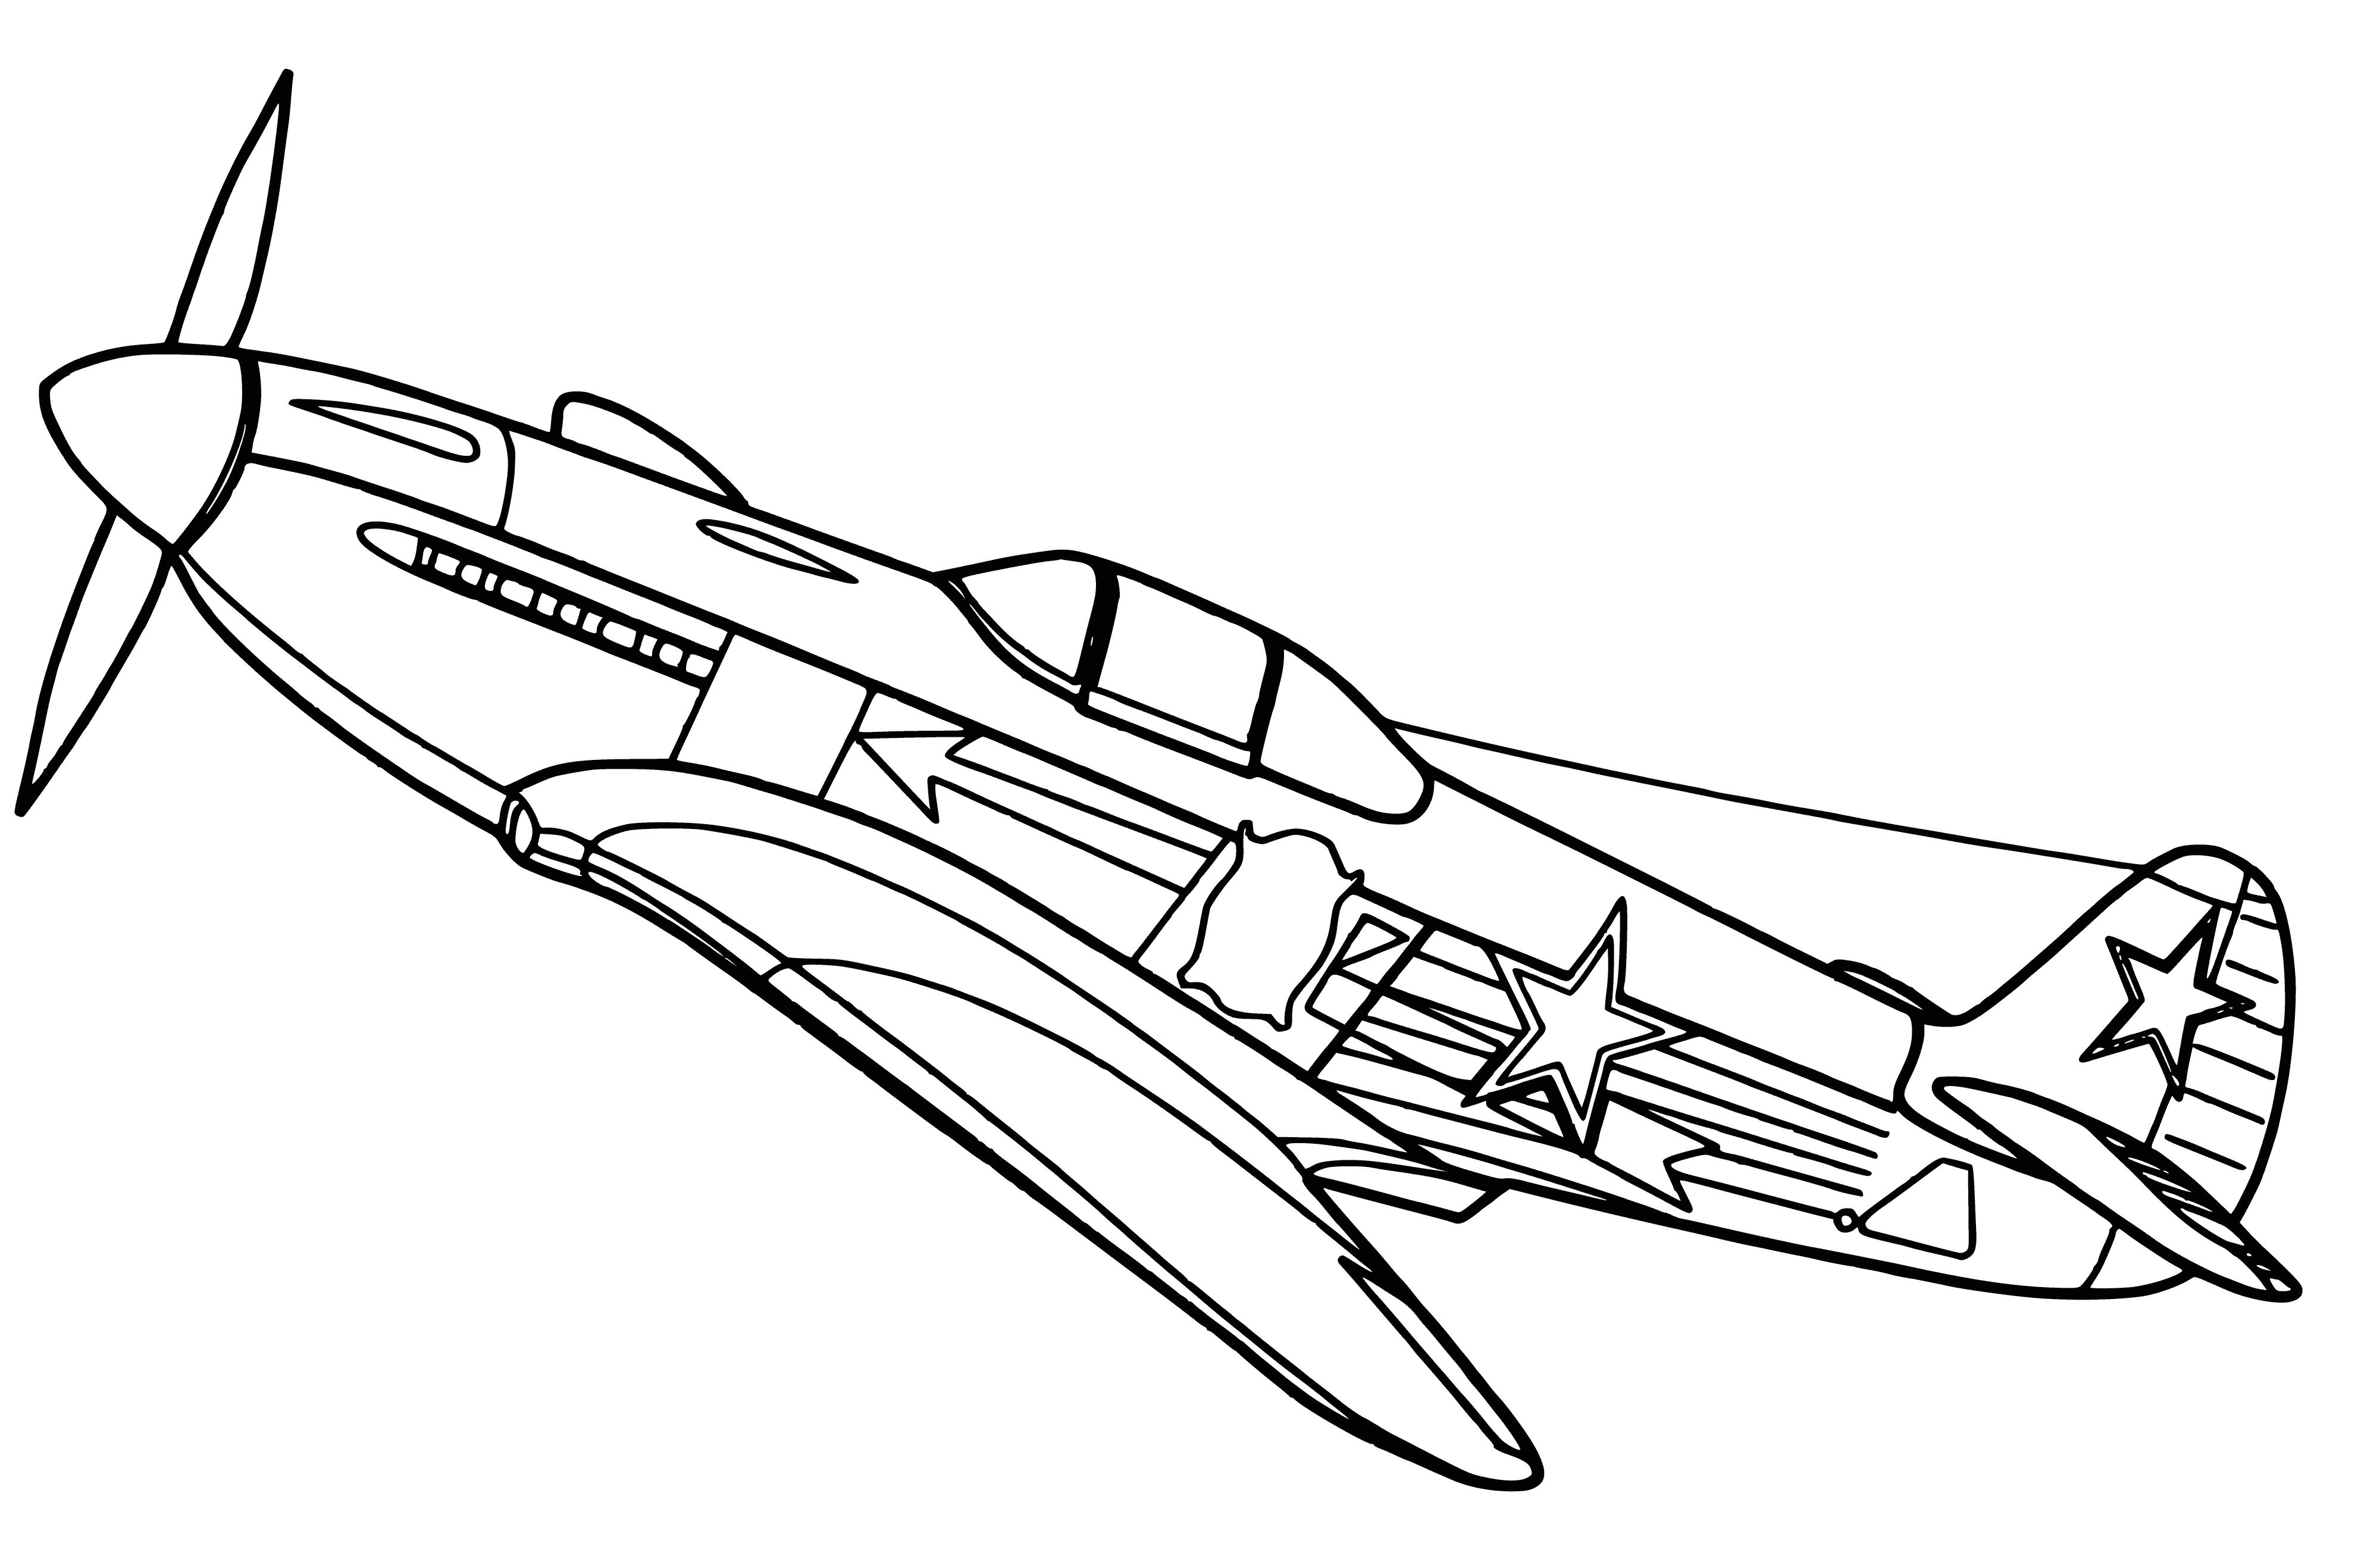 coloring page: WWII-era Soviet Yak-3 fighter plane: used as interceptor, escort fighter & ground-attack; noted for maneuverability & high altitude performance.